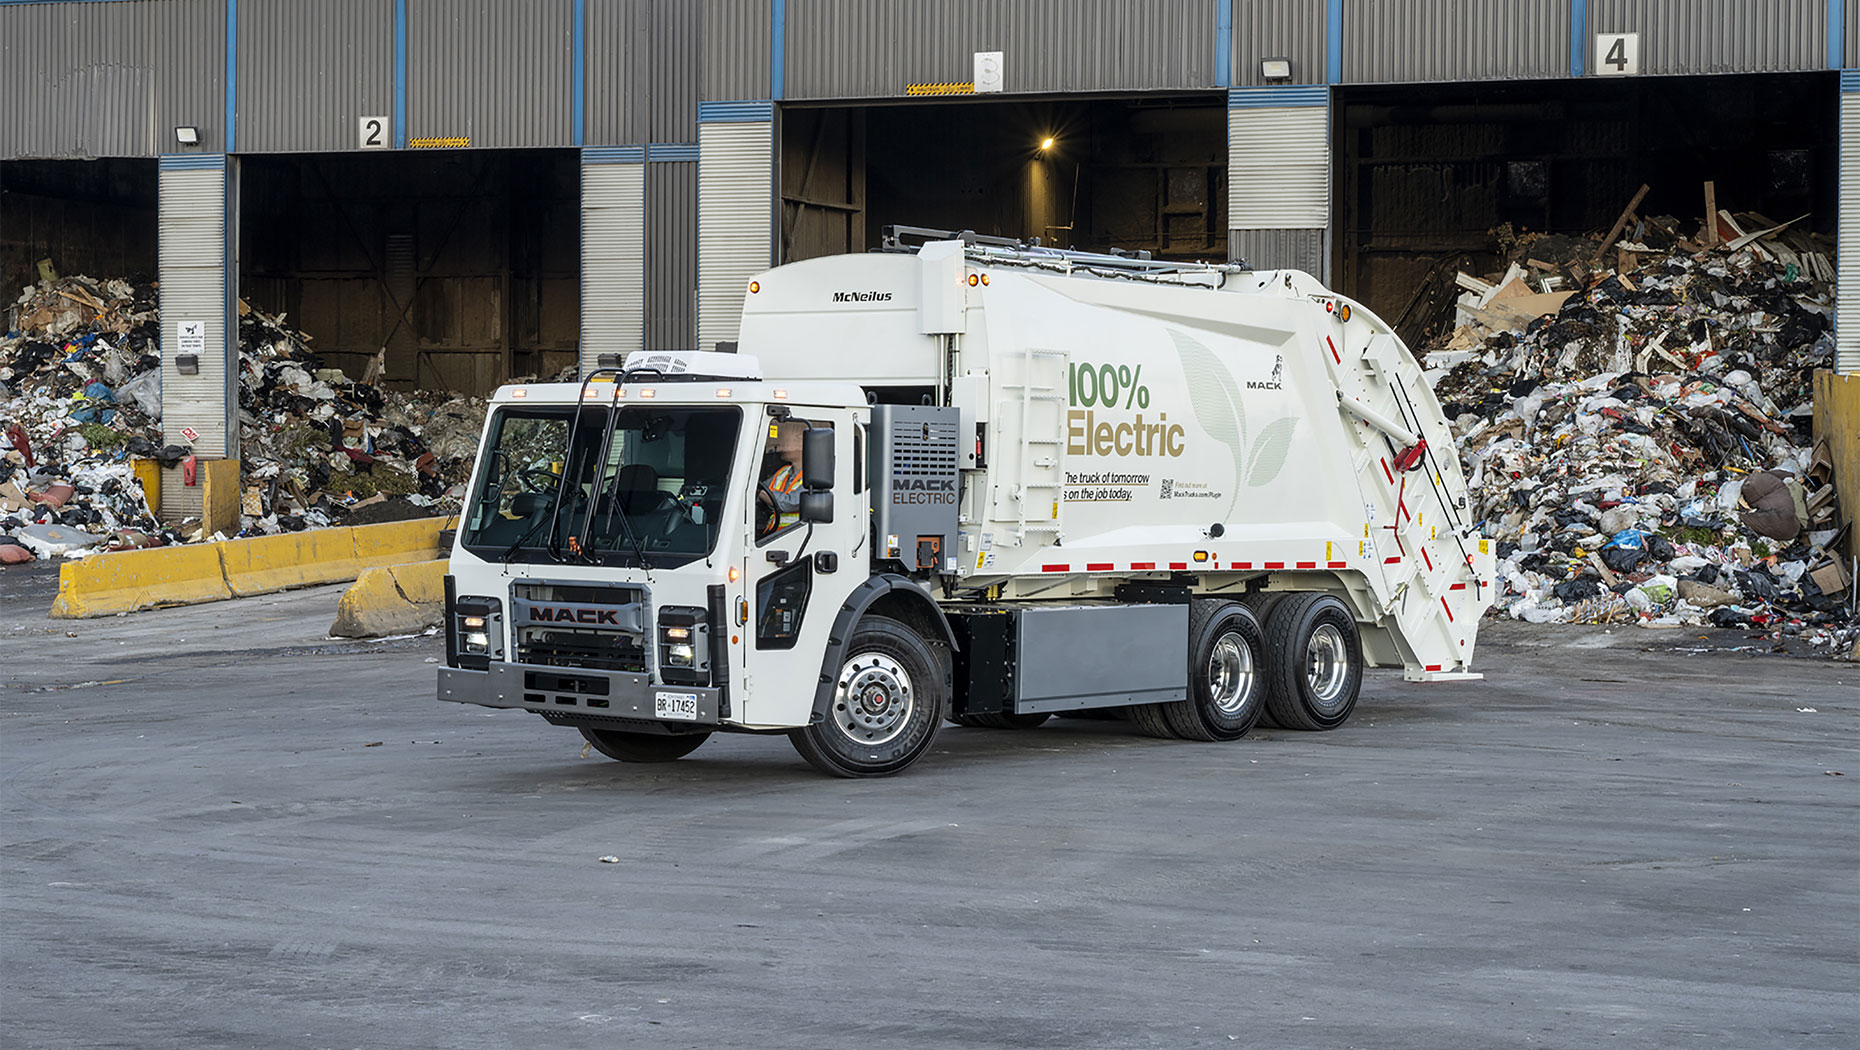 Mack LR® Electric Refuse Vehicle Part of 10 Million Award for a Clean